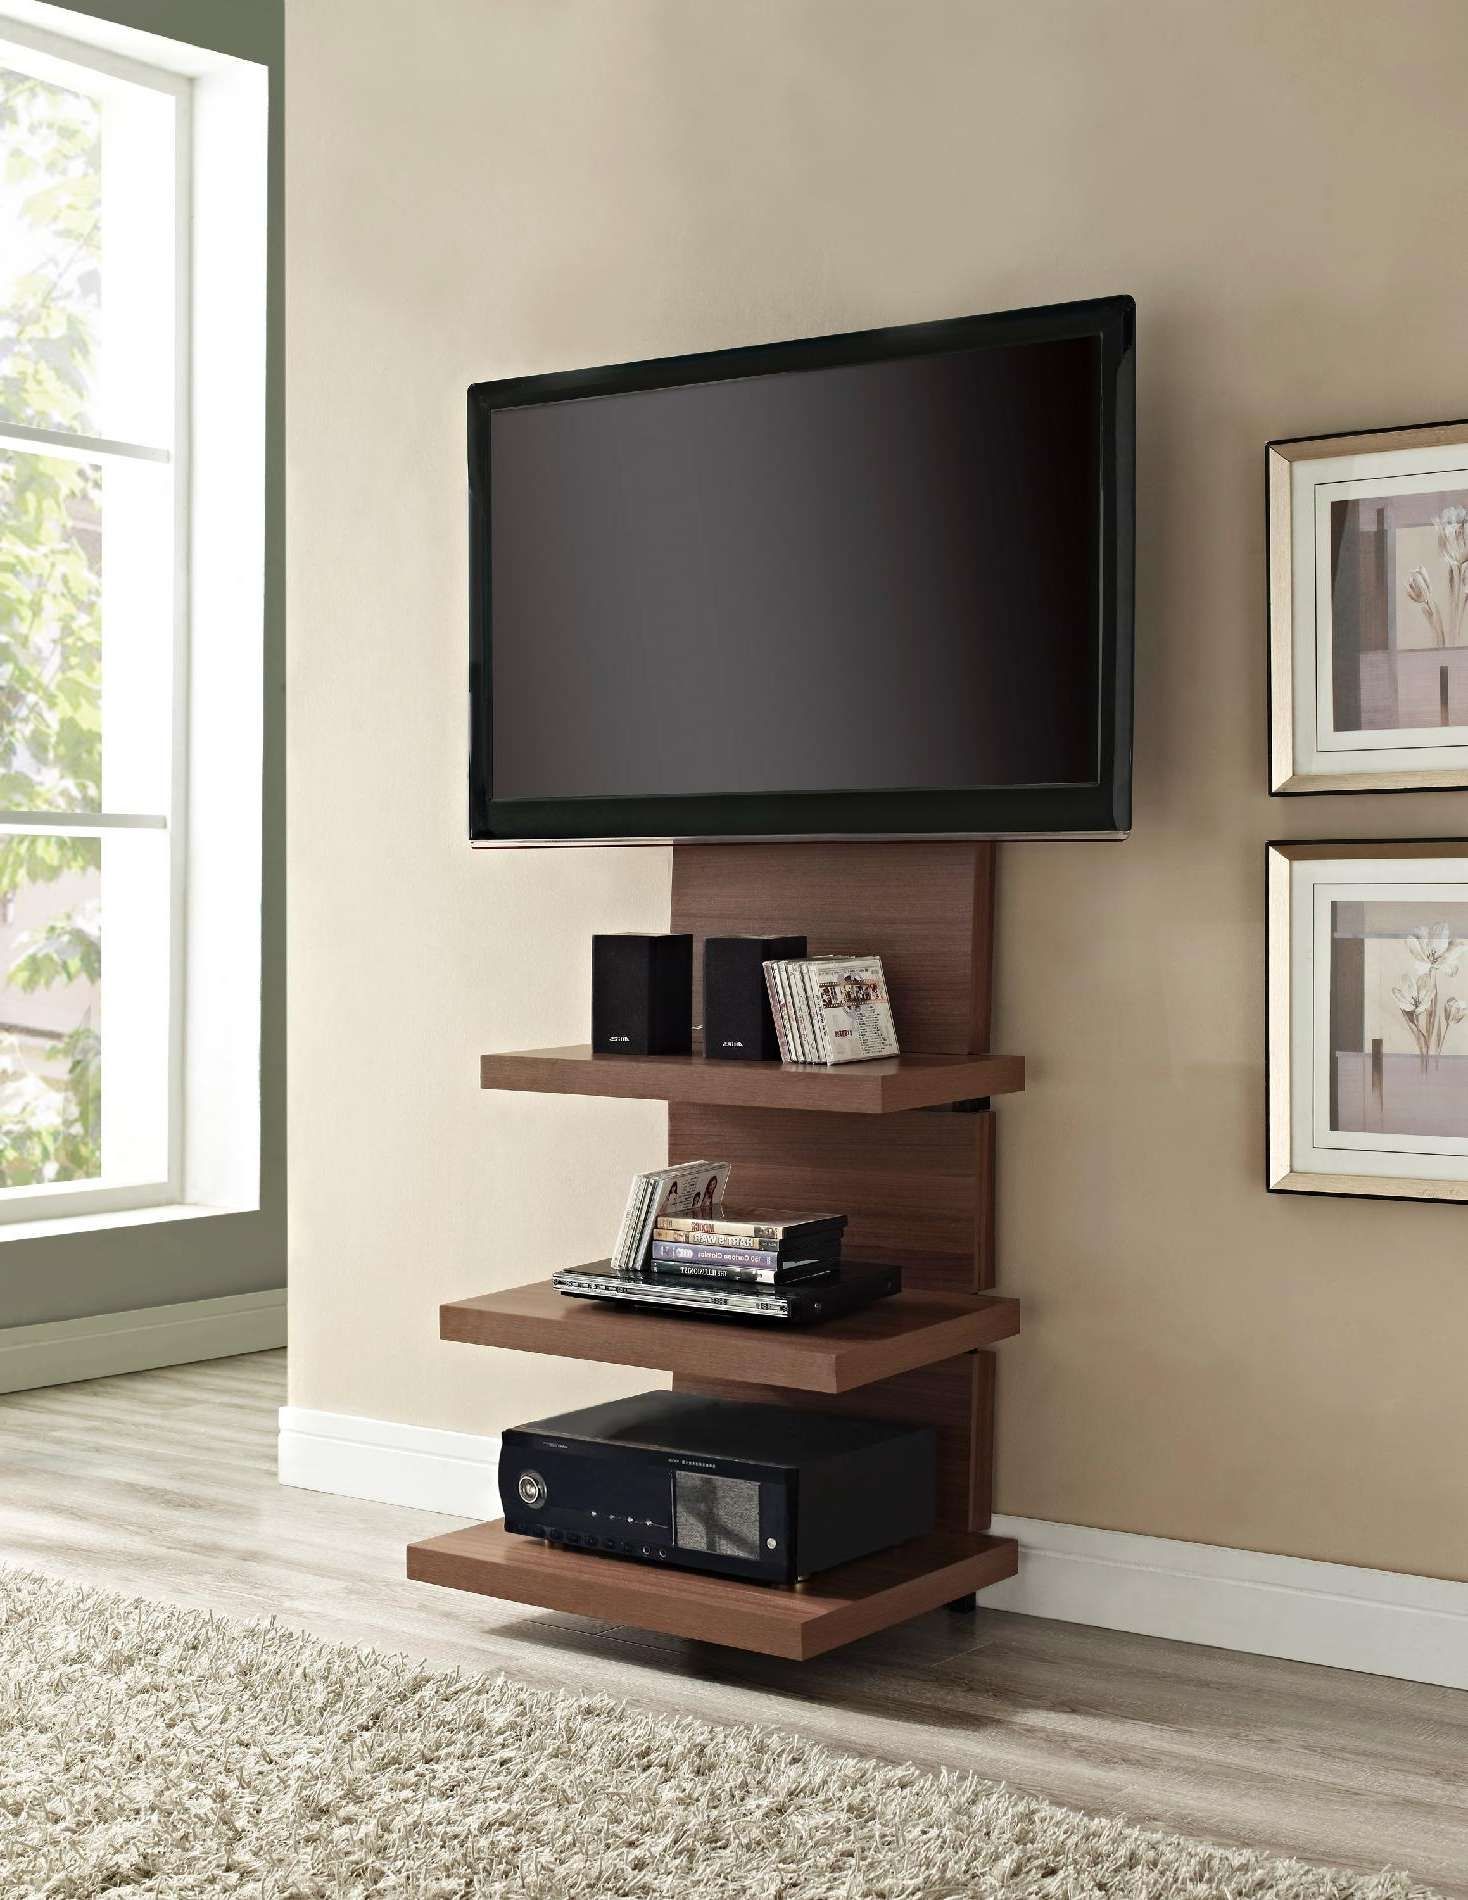 Great Tall Skinny Tv Stand 37 In Home Remodel Ideas With Tall Regarding Skinny Tv Stands (View 2 of 15)